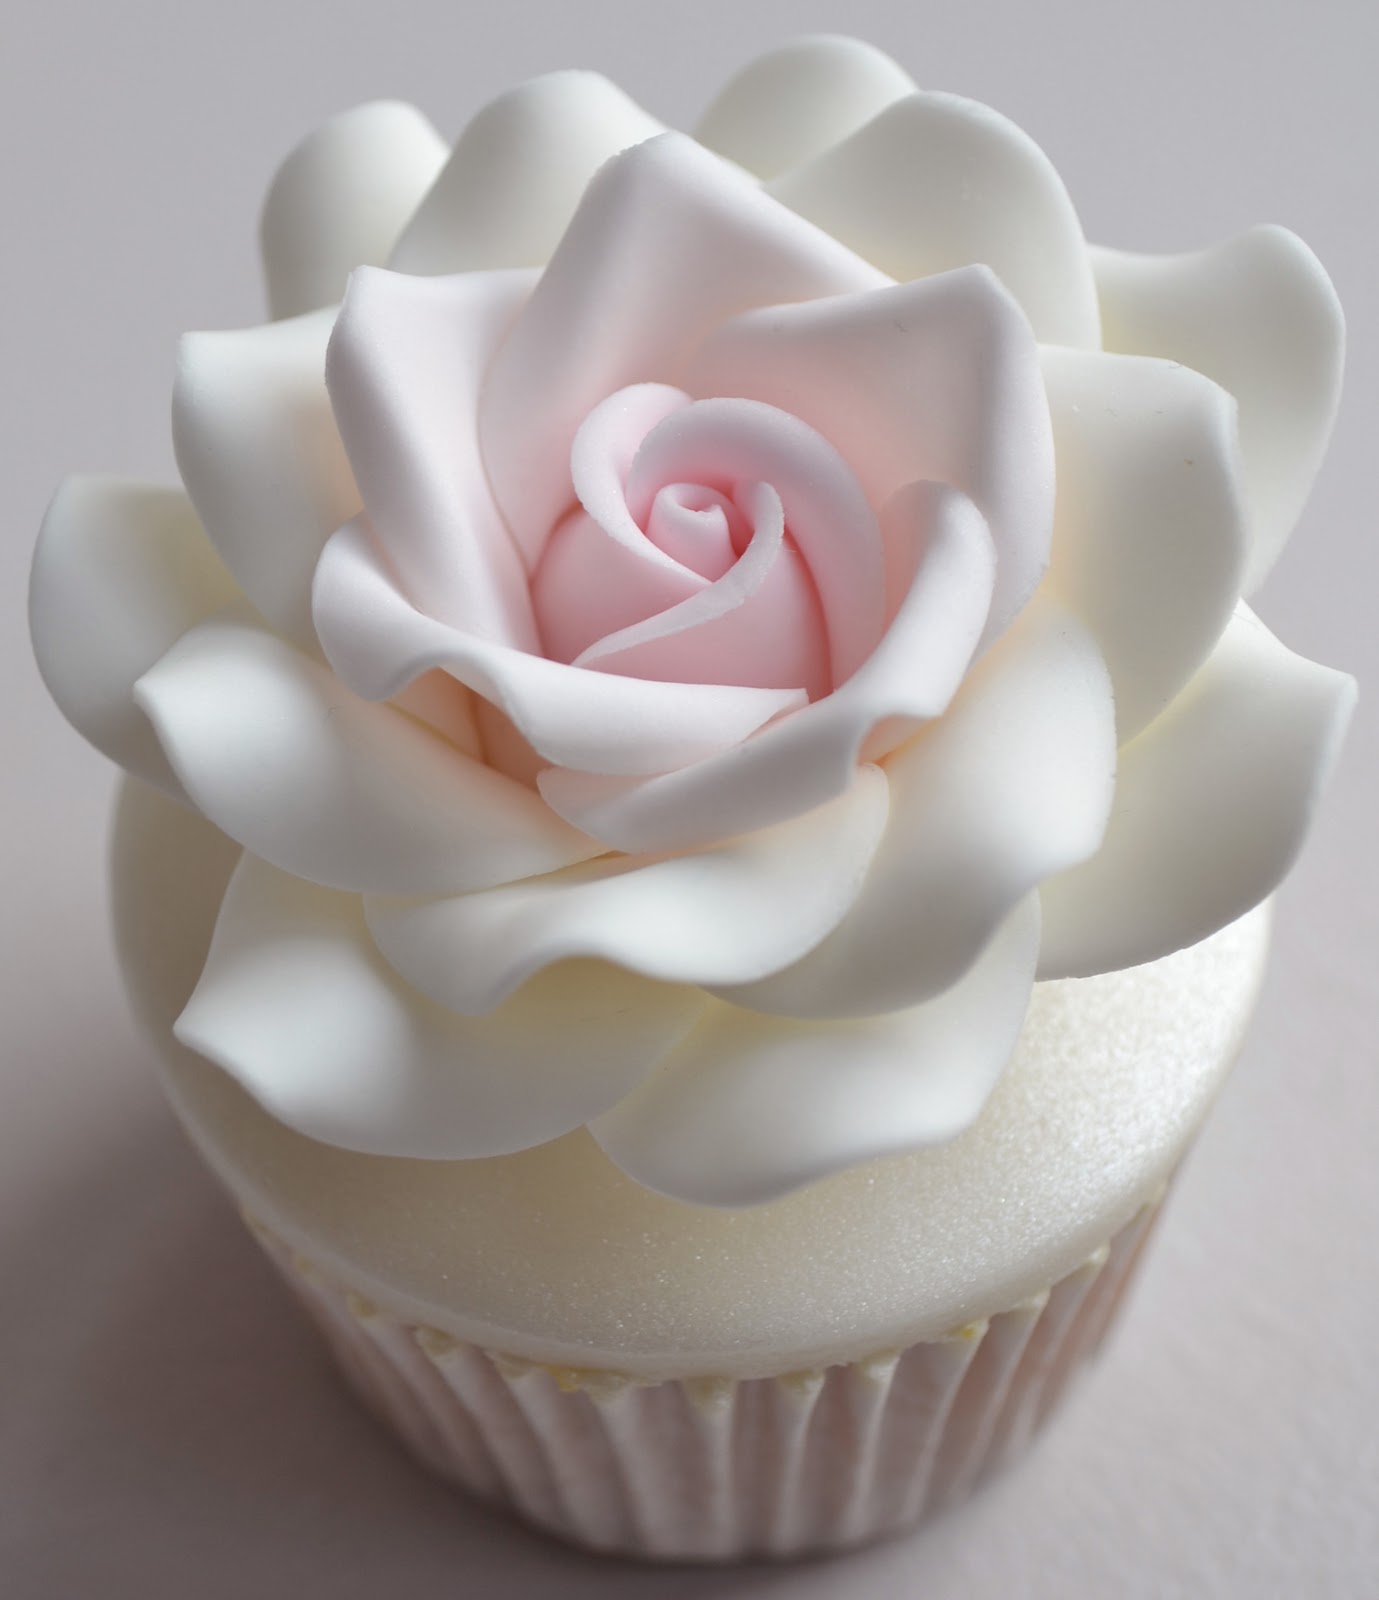 and Jo's rose beautiful vintage cupcakes twitter with   wedding colours and vintage cupcakes Richard